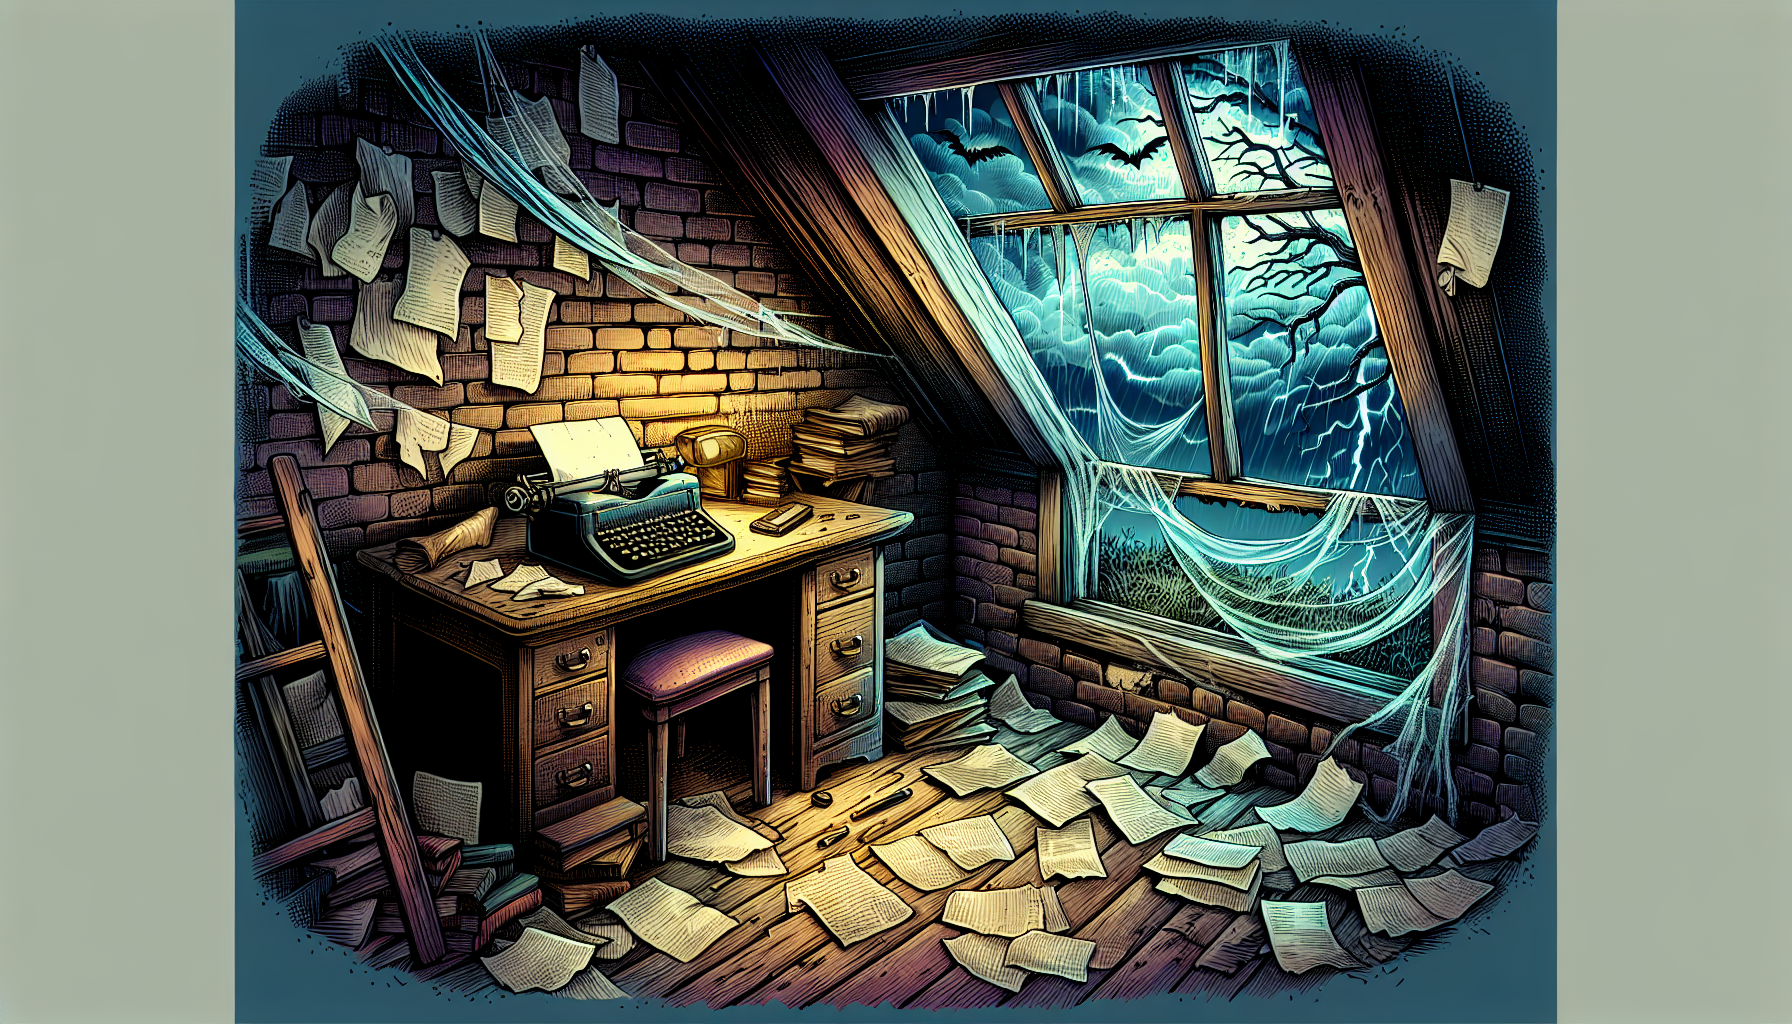 A dimly lit, eerie attic with an old typewriter on a wooden desk, scattered papers, cobwebs in the corners, and a half-open window with curtains fluttering in the wind, under a stormy sky.